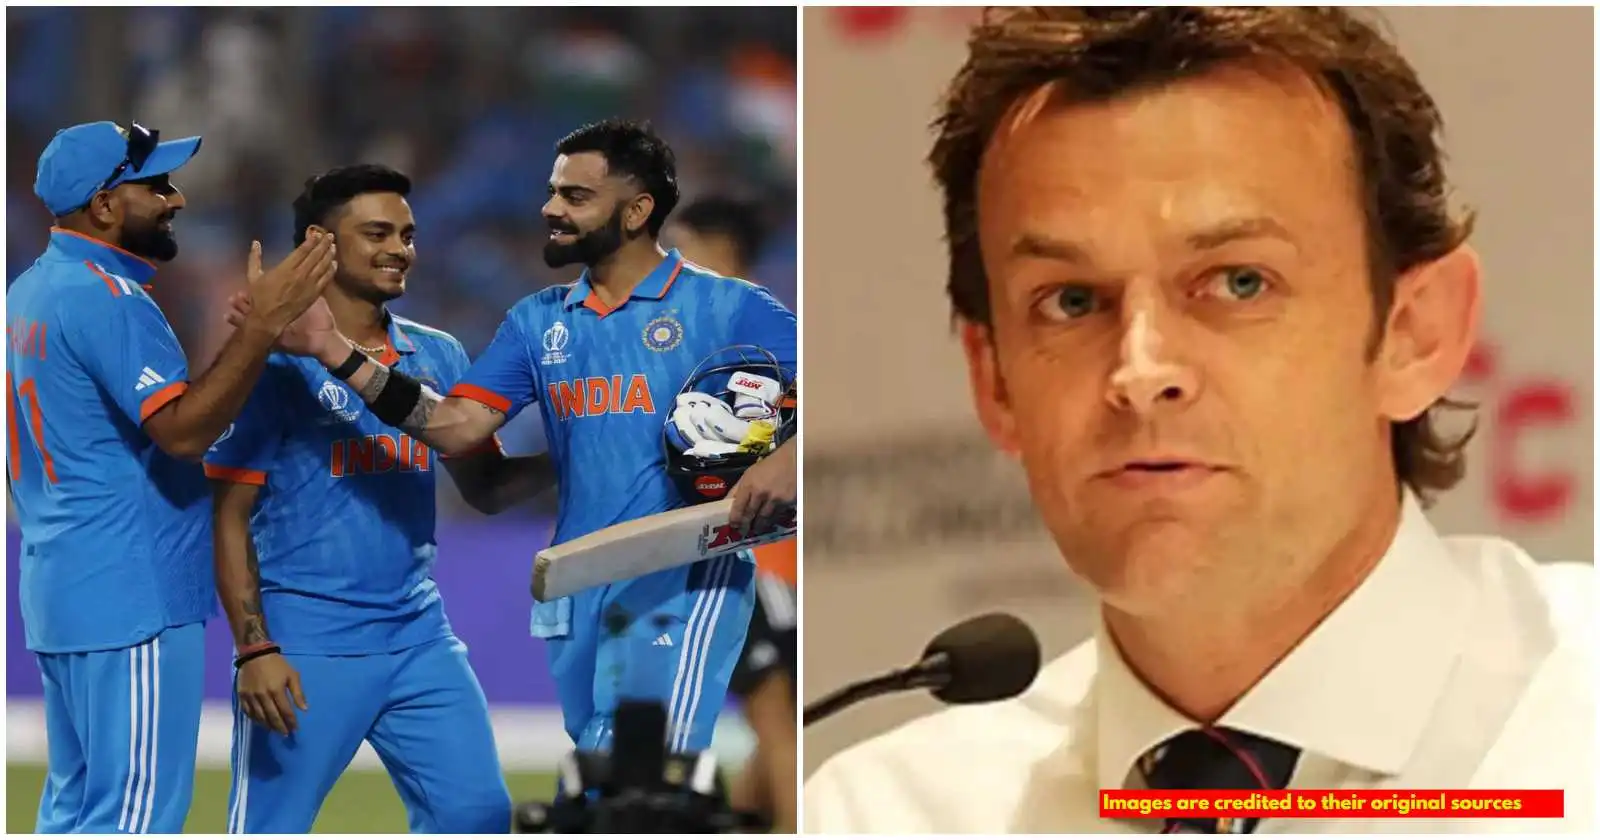 Adam Gilchrist shares his World Cup winning tactic against India.